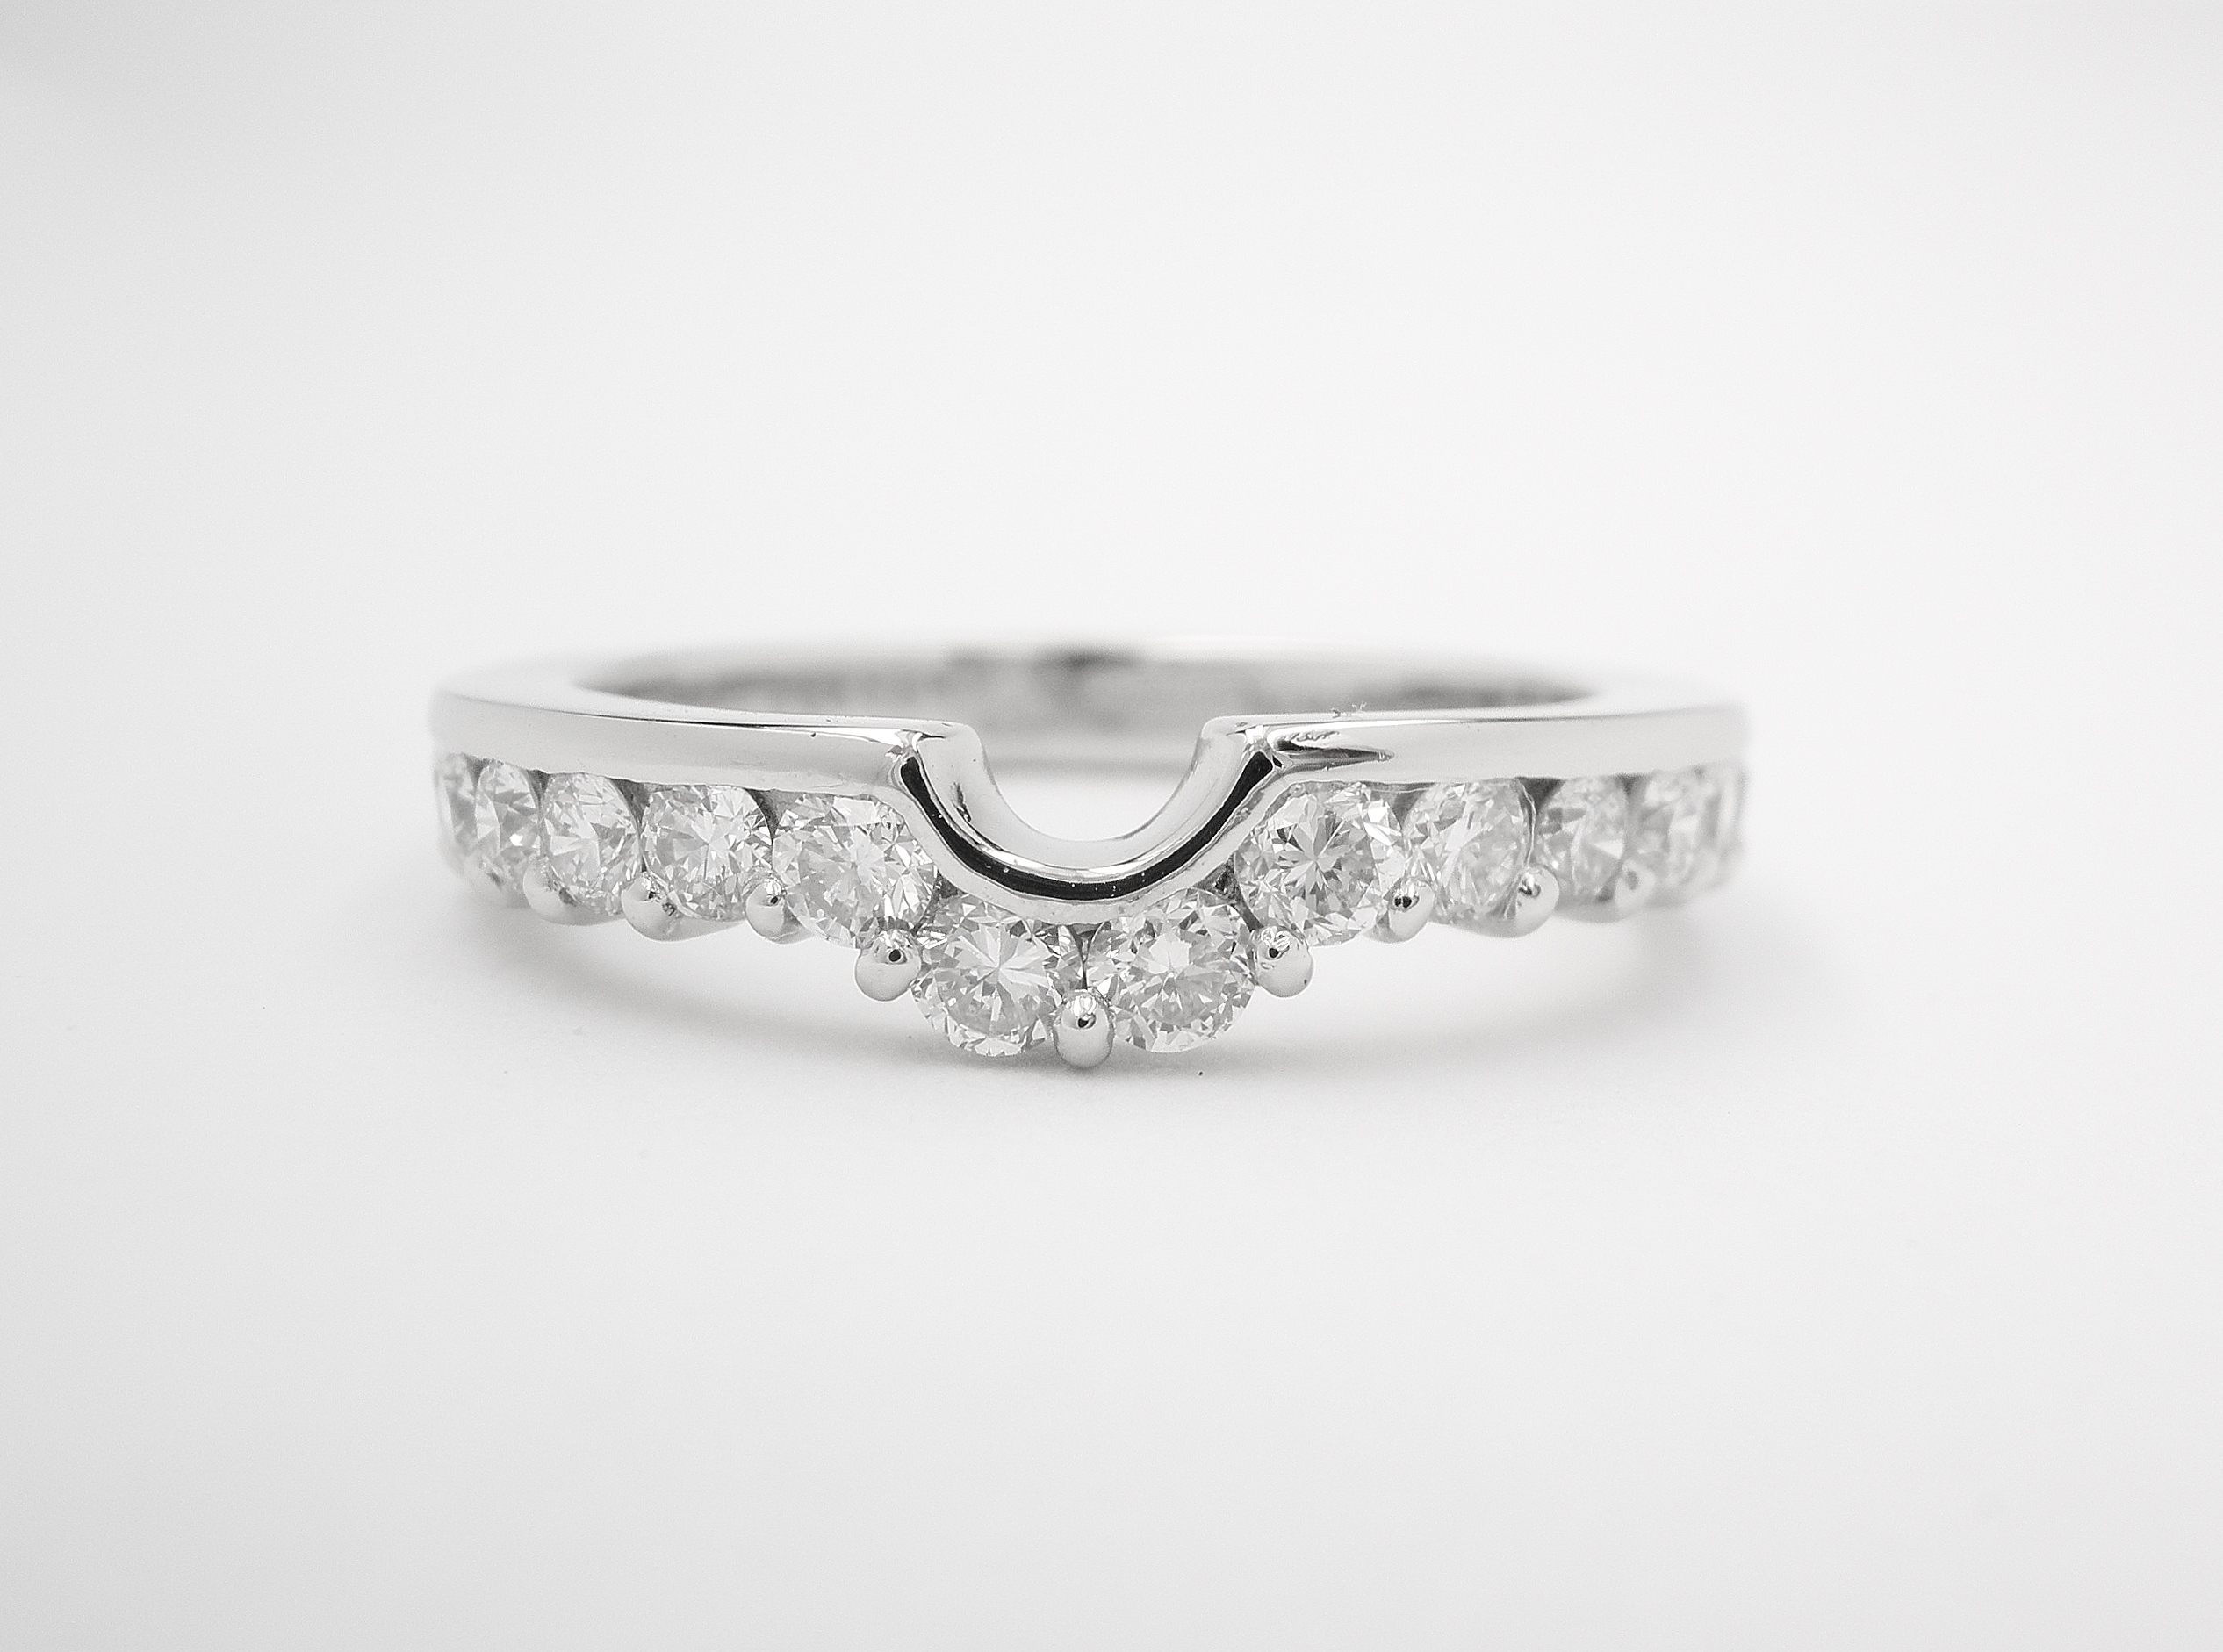 Part channel set platinum wedding ring shaped to fit with a single stone round diamond engagement ring.